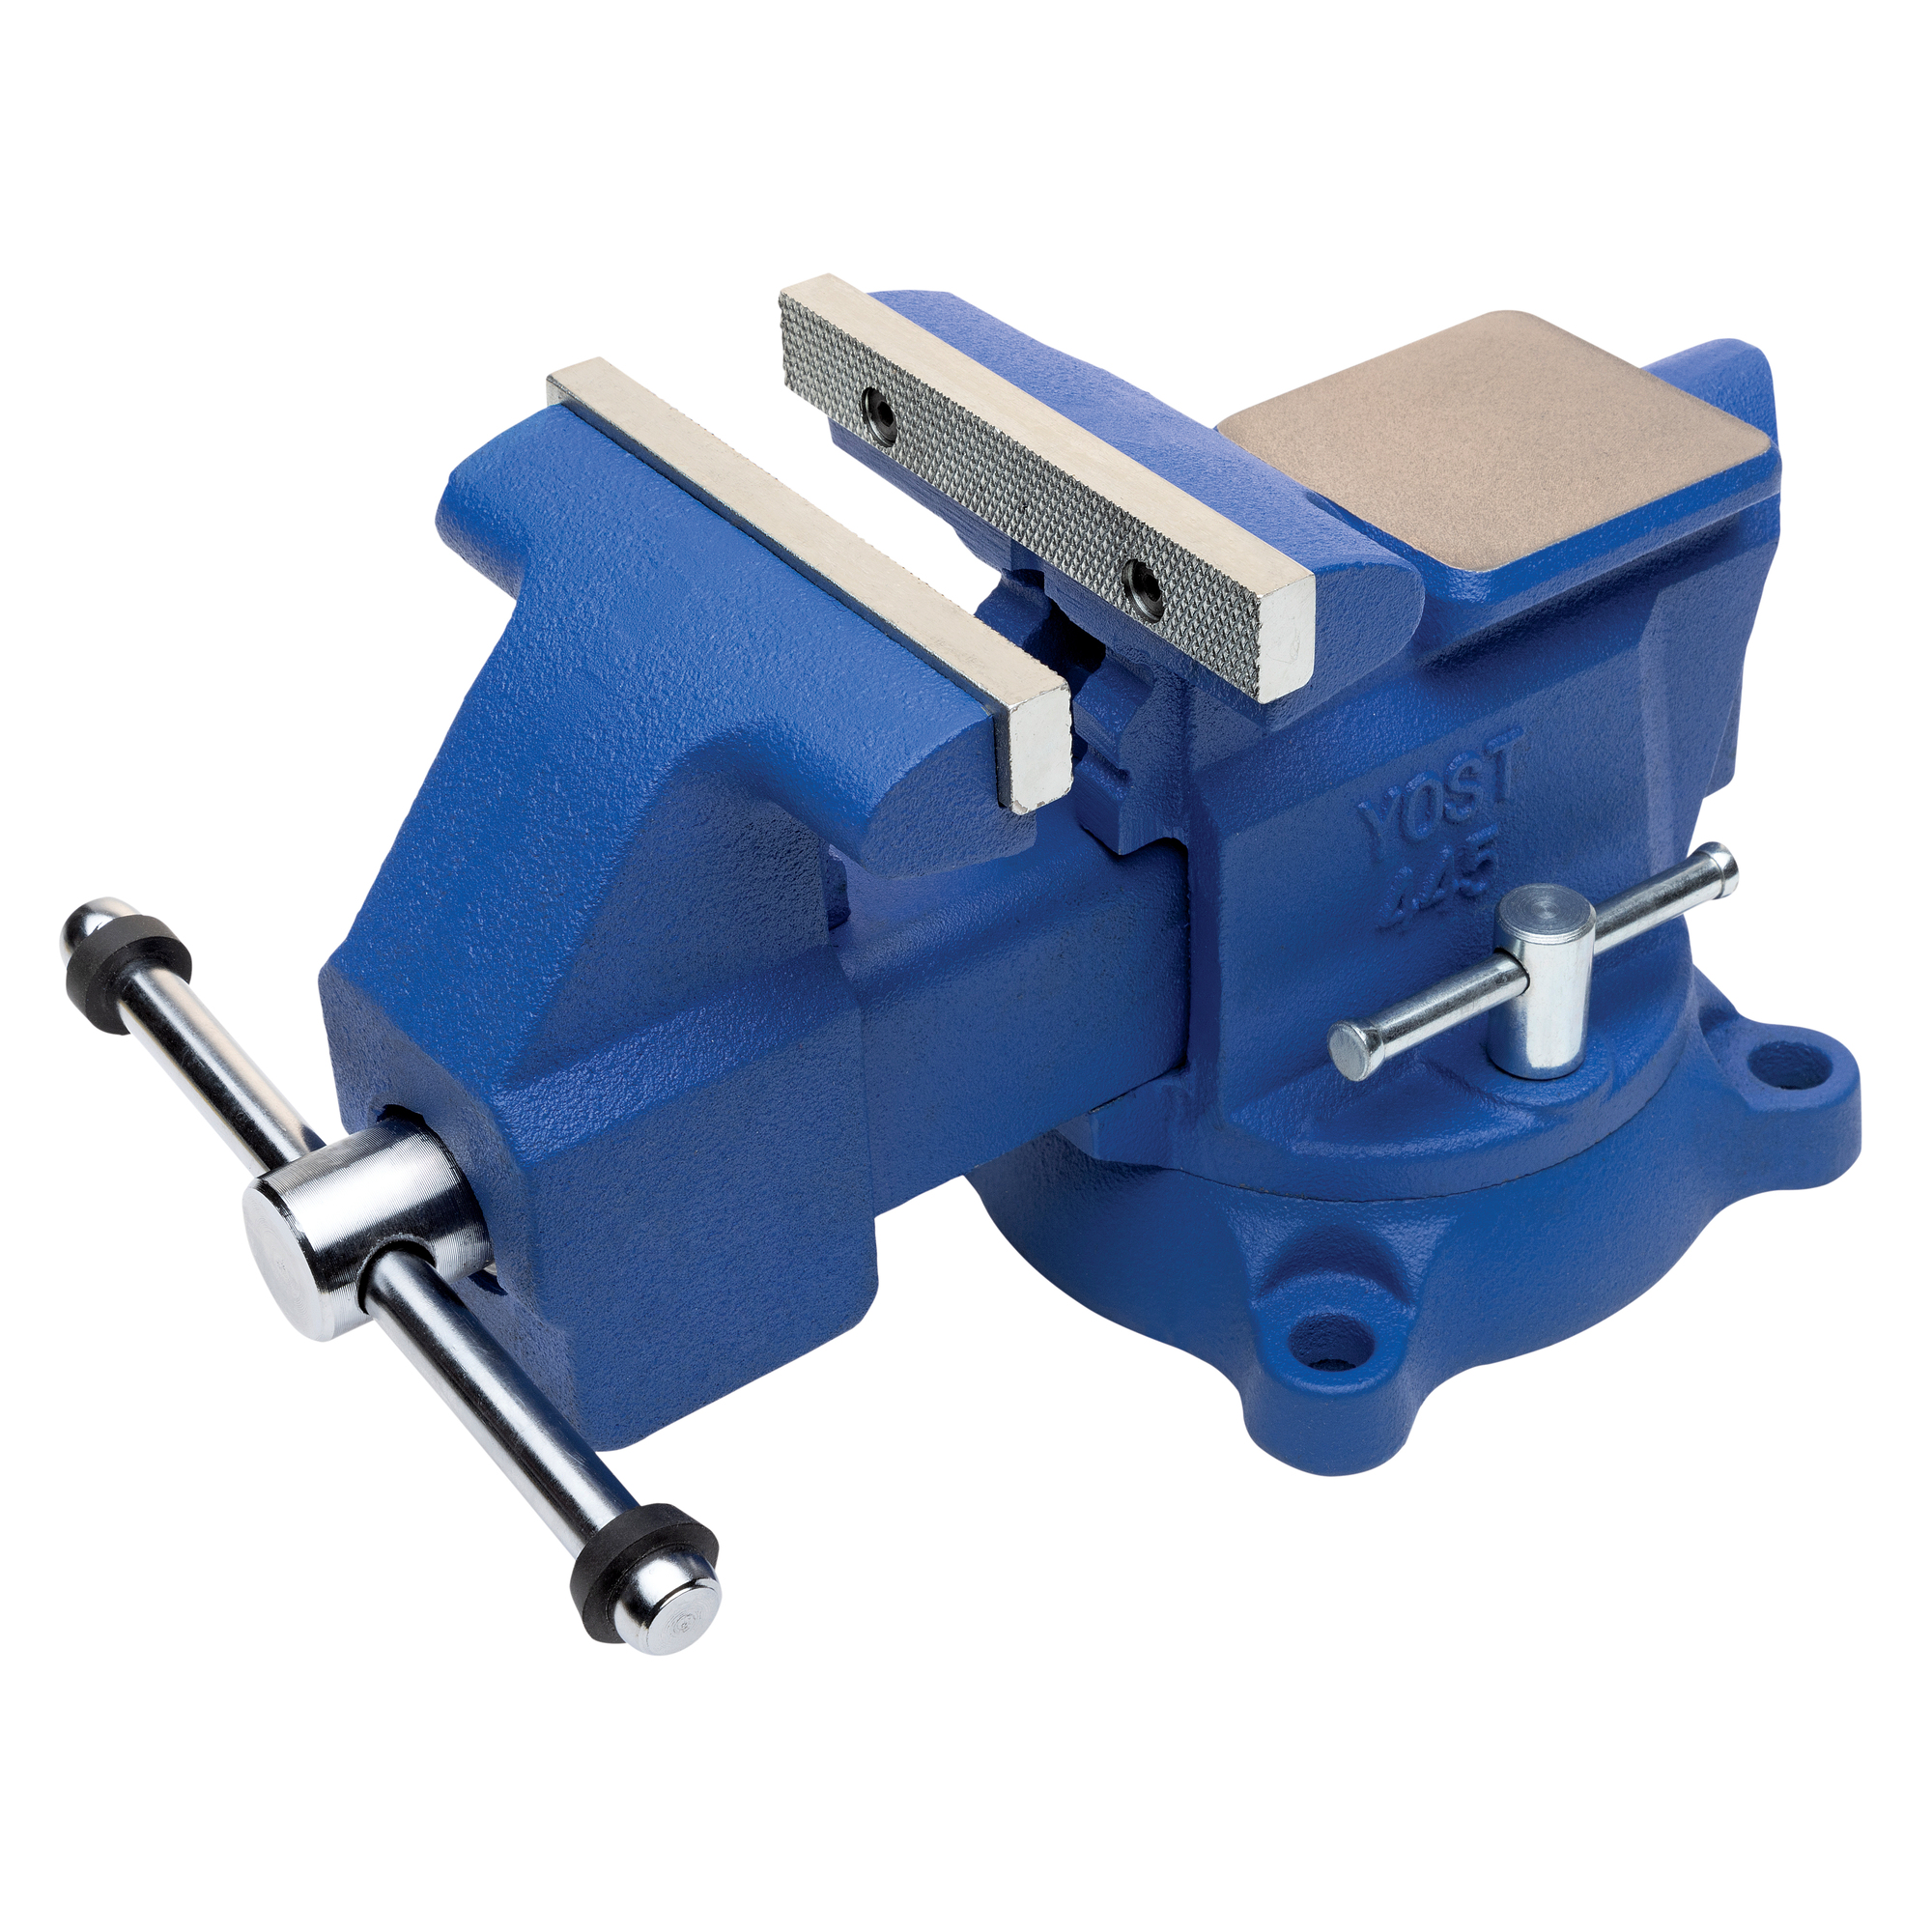 Yost Vises, 4.5Inch Utility Bench Vise, Jaw Width 4.5 in, Jaw Capacity 4 in, Material Cast Iron, Model 445 -  56411